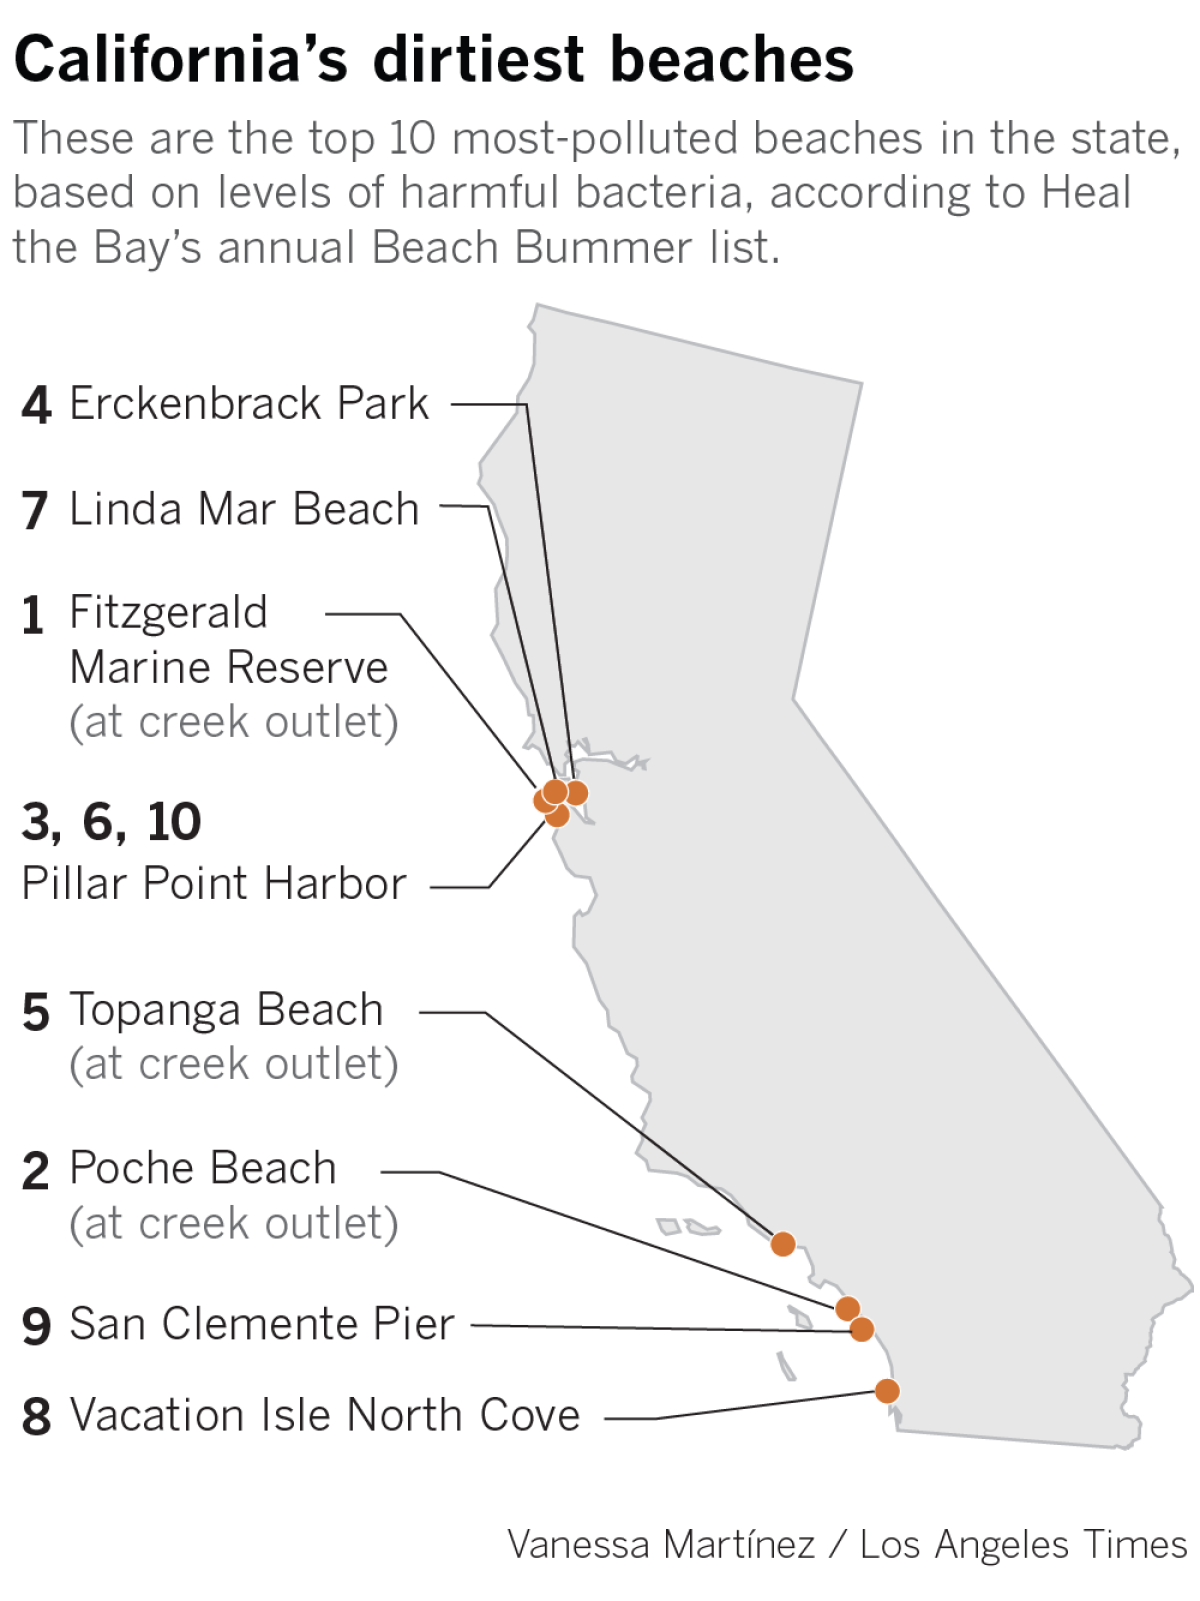 California's 10 most-polluted beaches